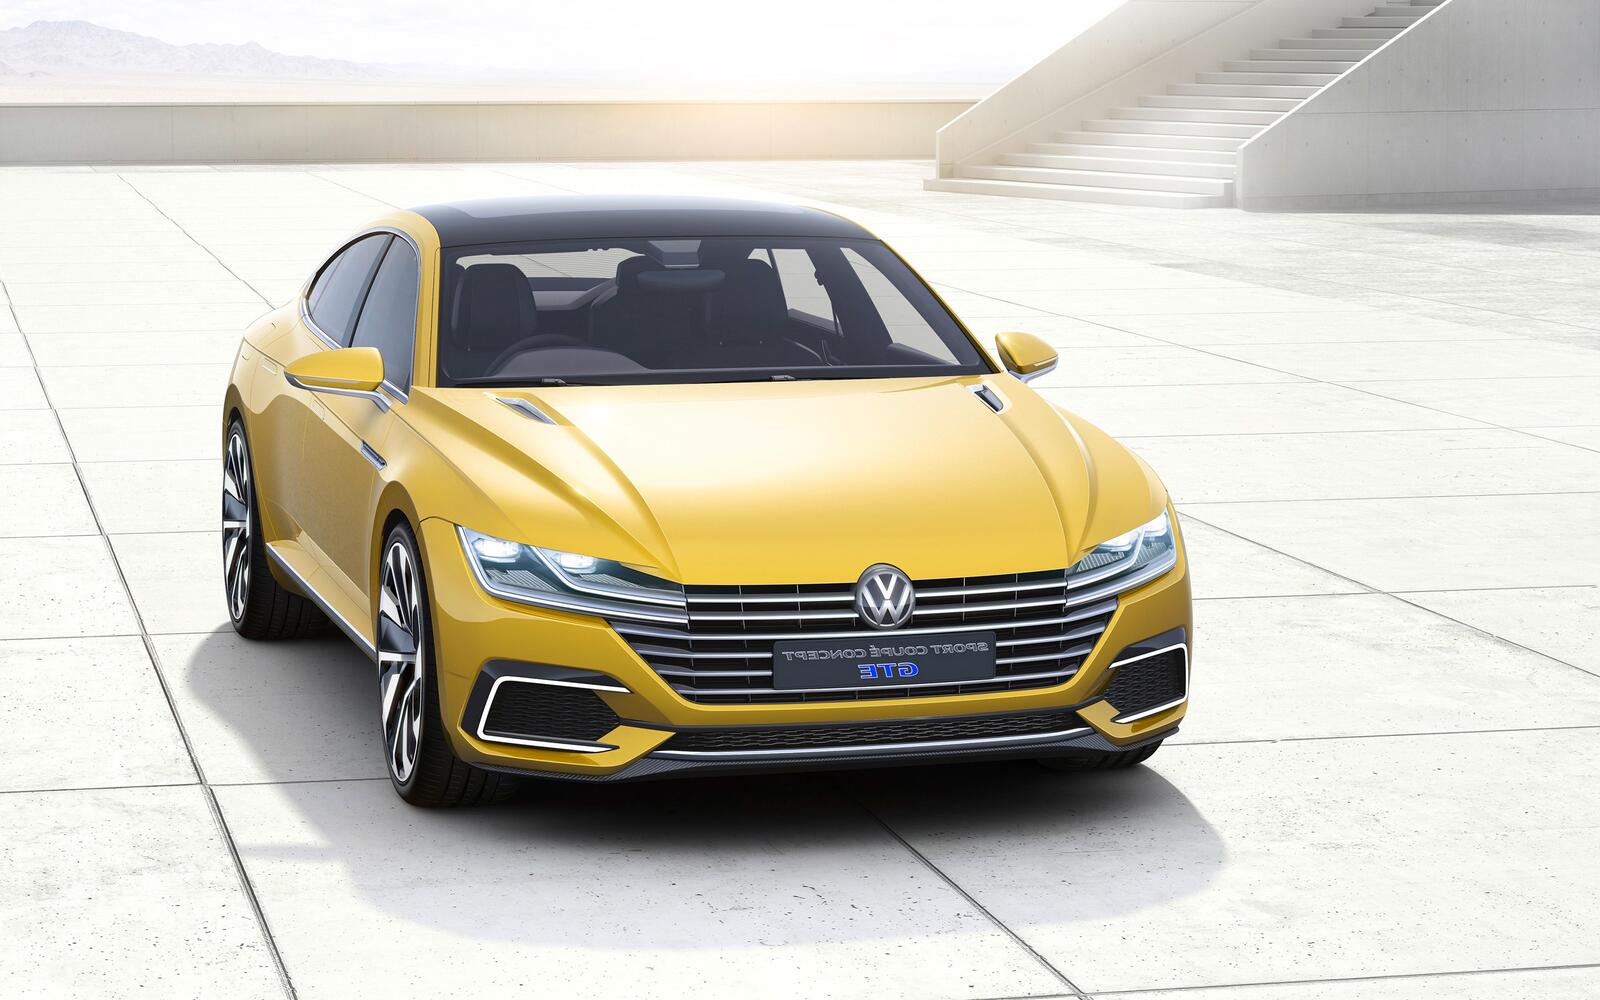 Free photo Volkswagen concept car in yellow color